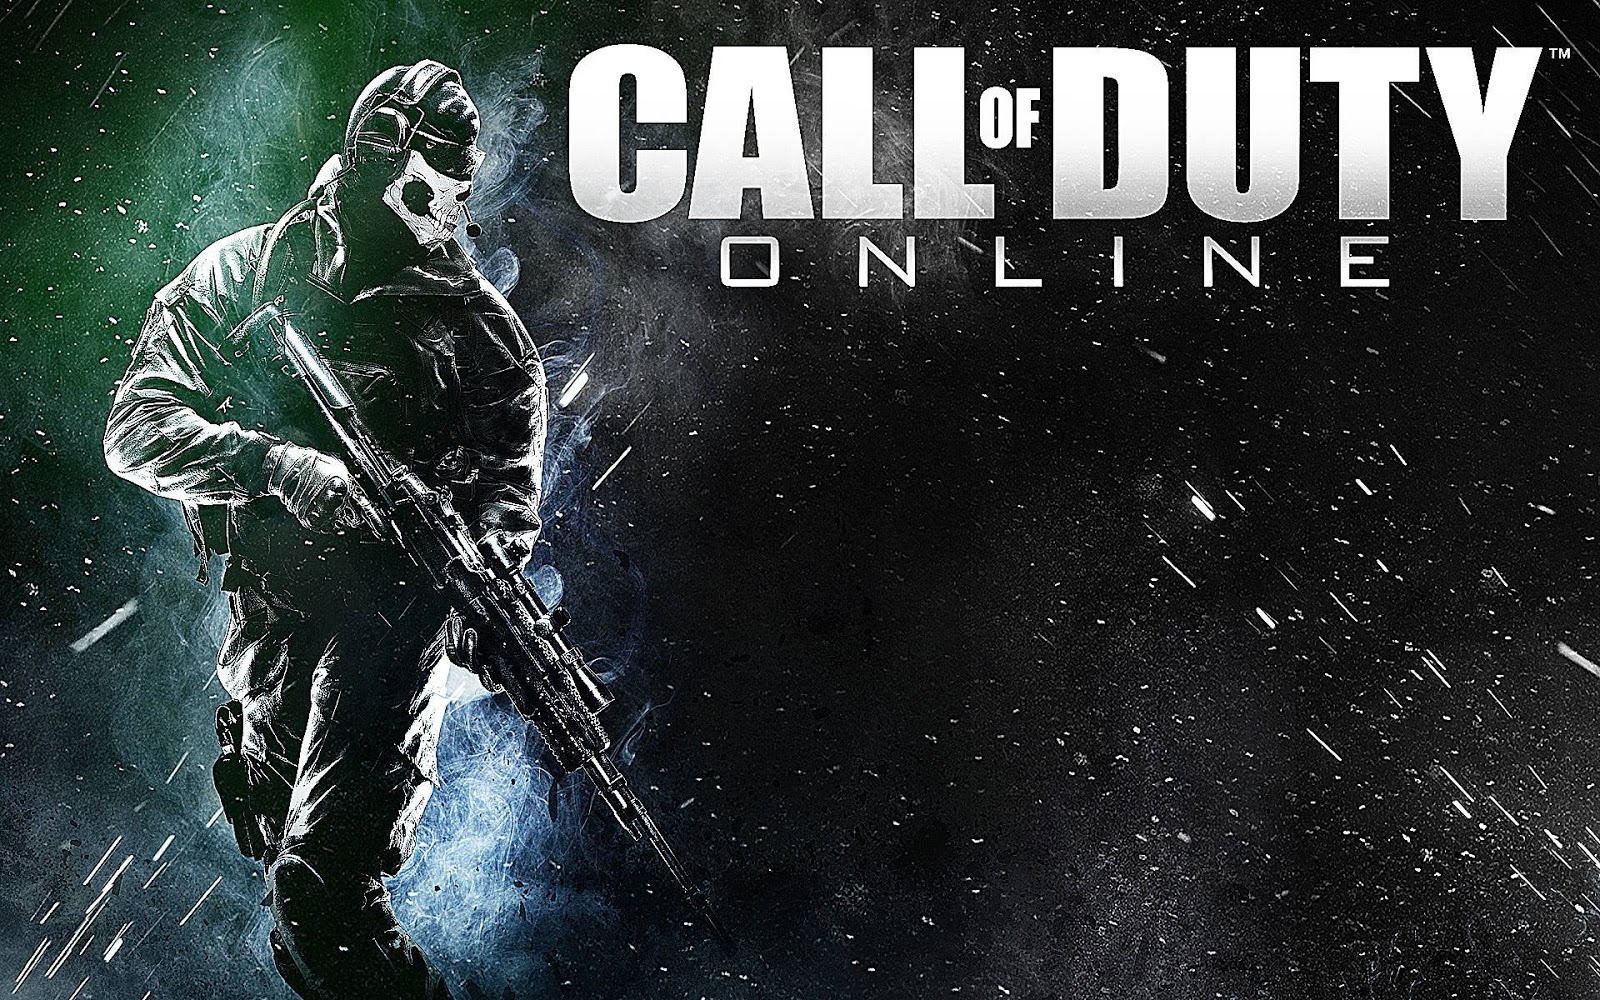 call of duty wallpaper hd,action adventure game,album cover,font,movie,poster